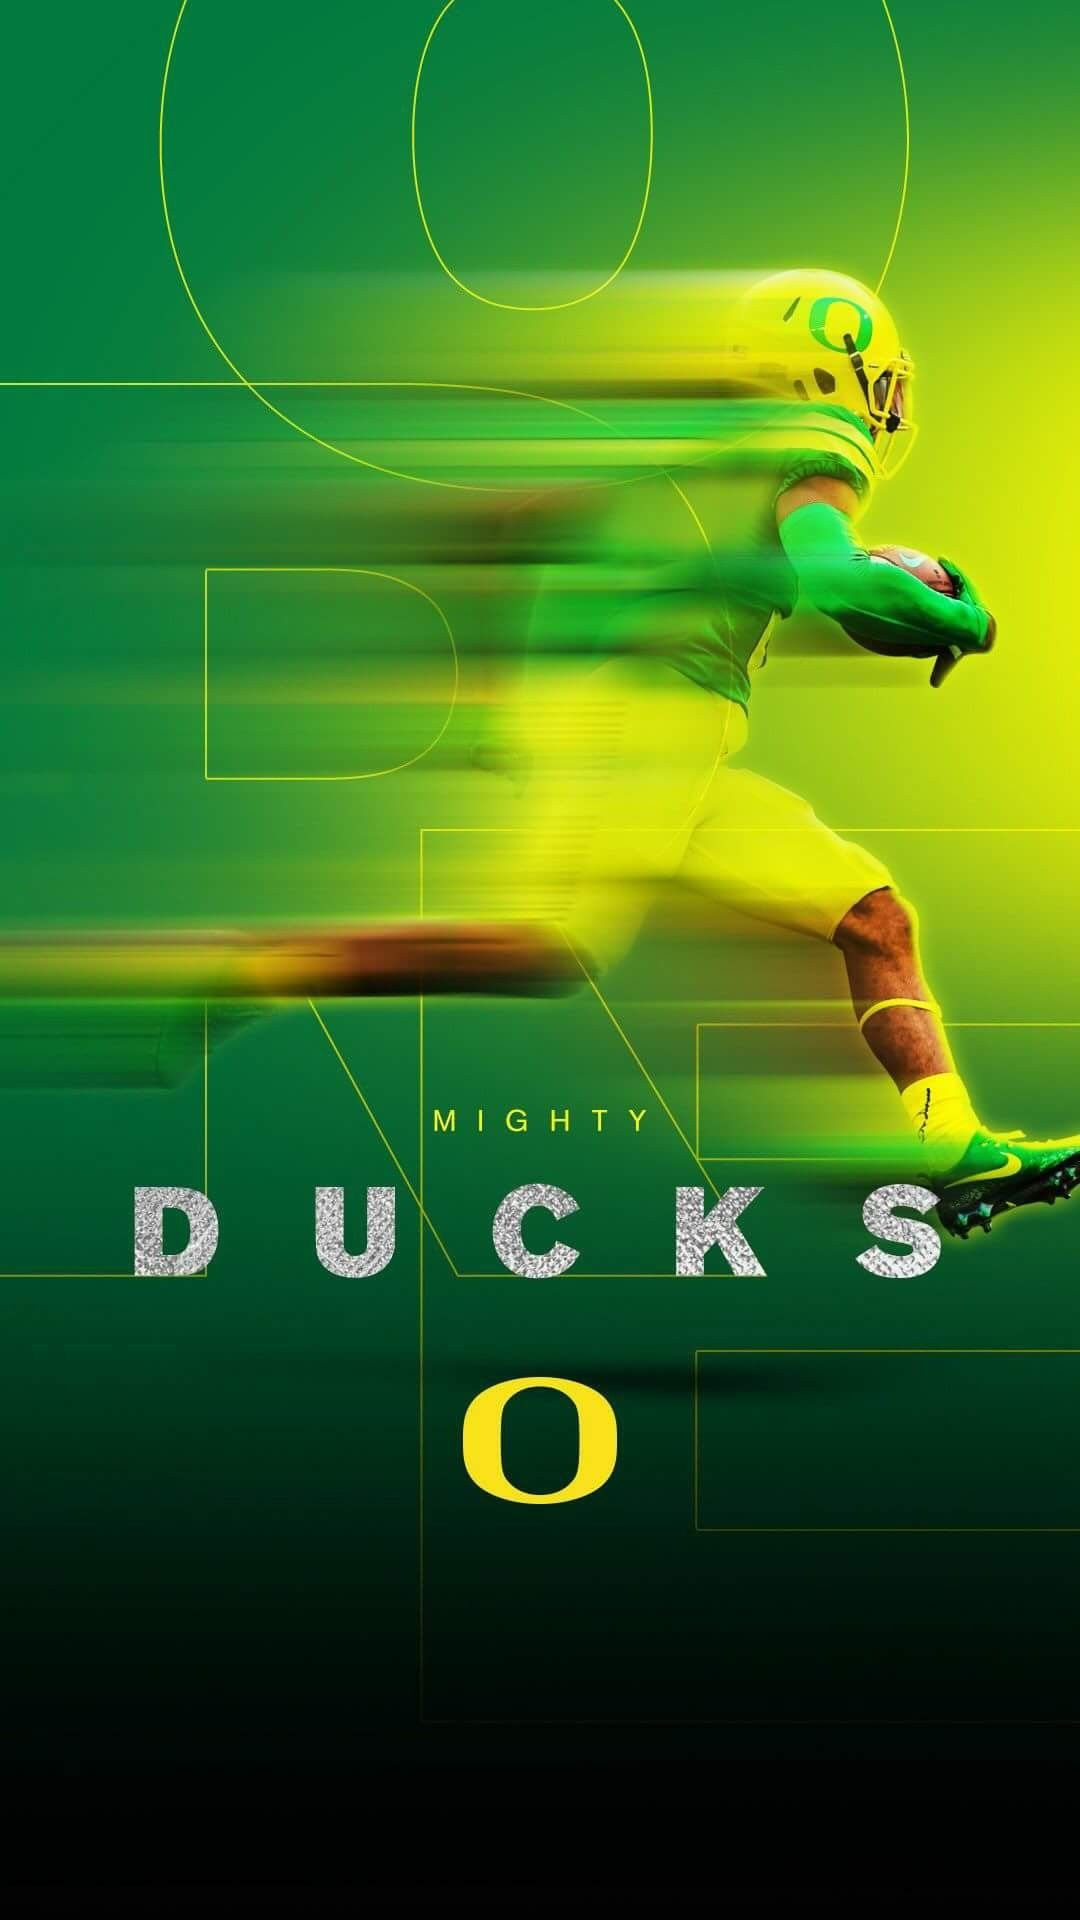 1080x1920 Pin by Peter Hutcheson on OREGON | Oregon ducks football, Oregon ducks, Ducks football